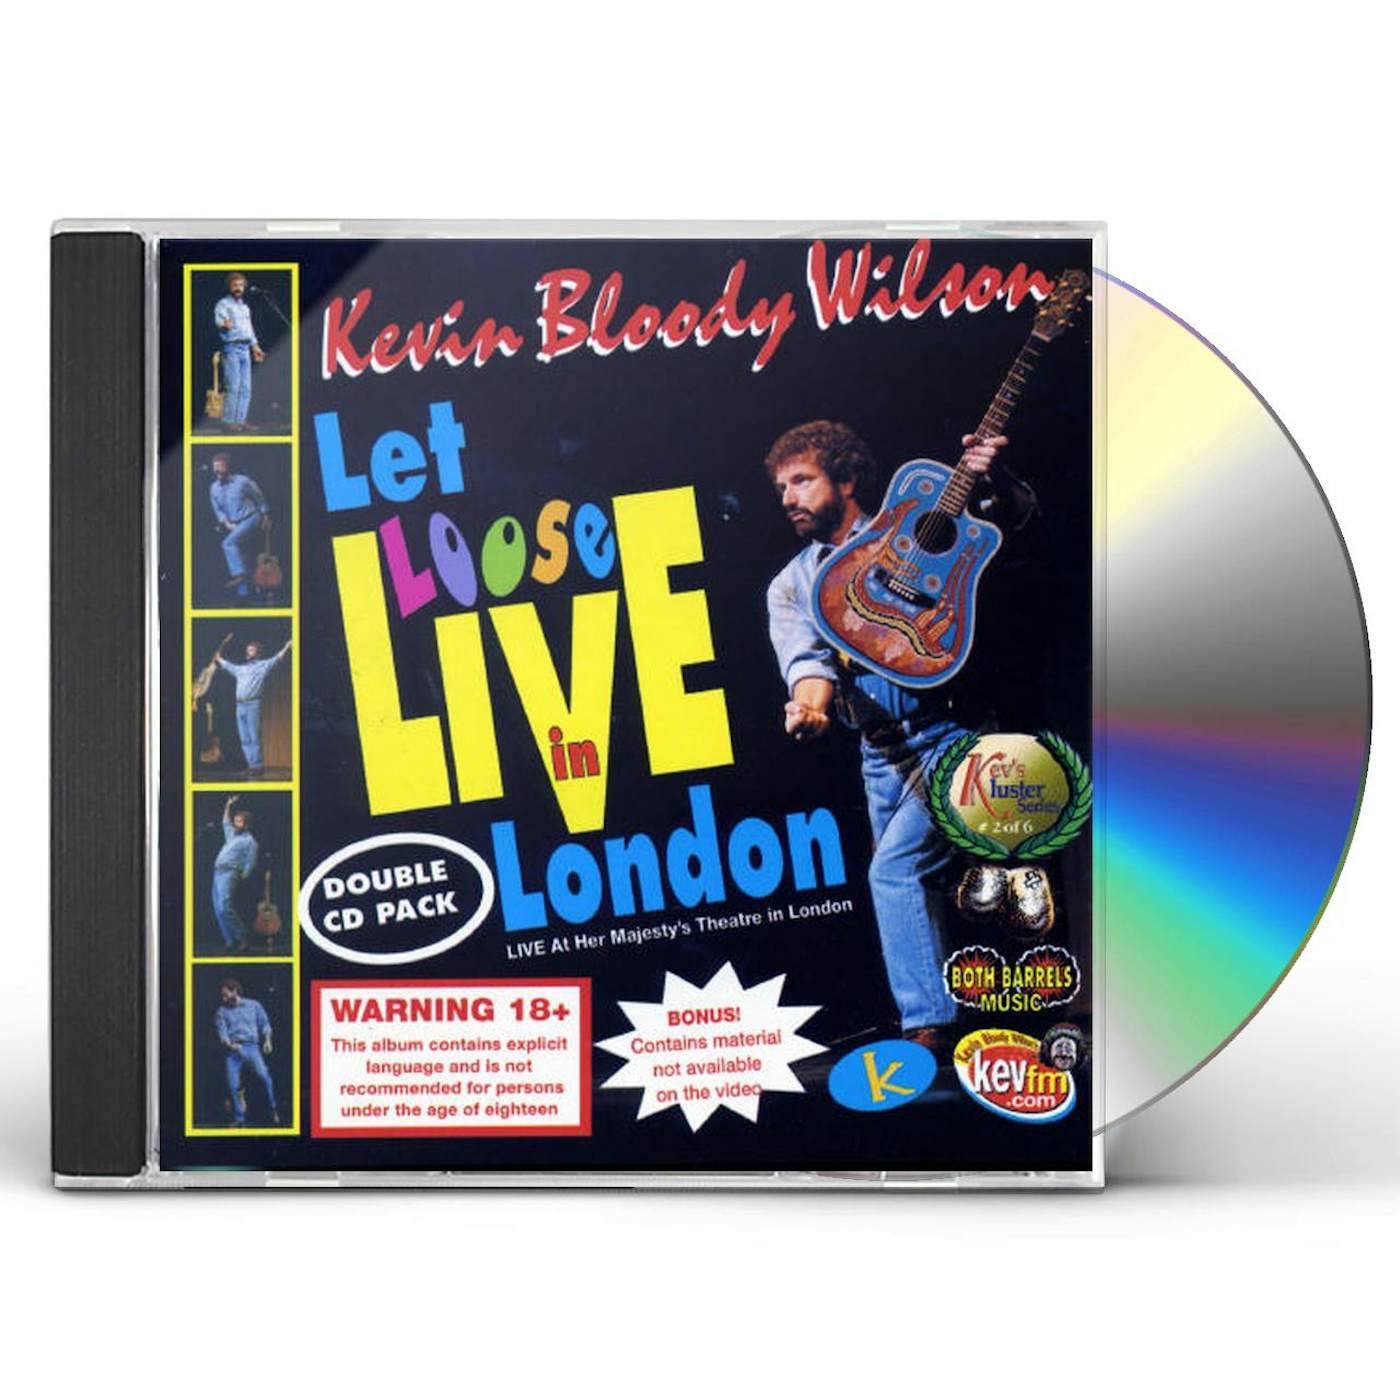 Kevin Bloody Wilson LET LOOSE LIVE IN LONDON CD